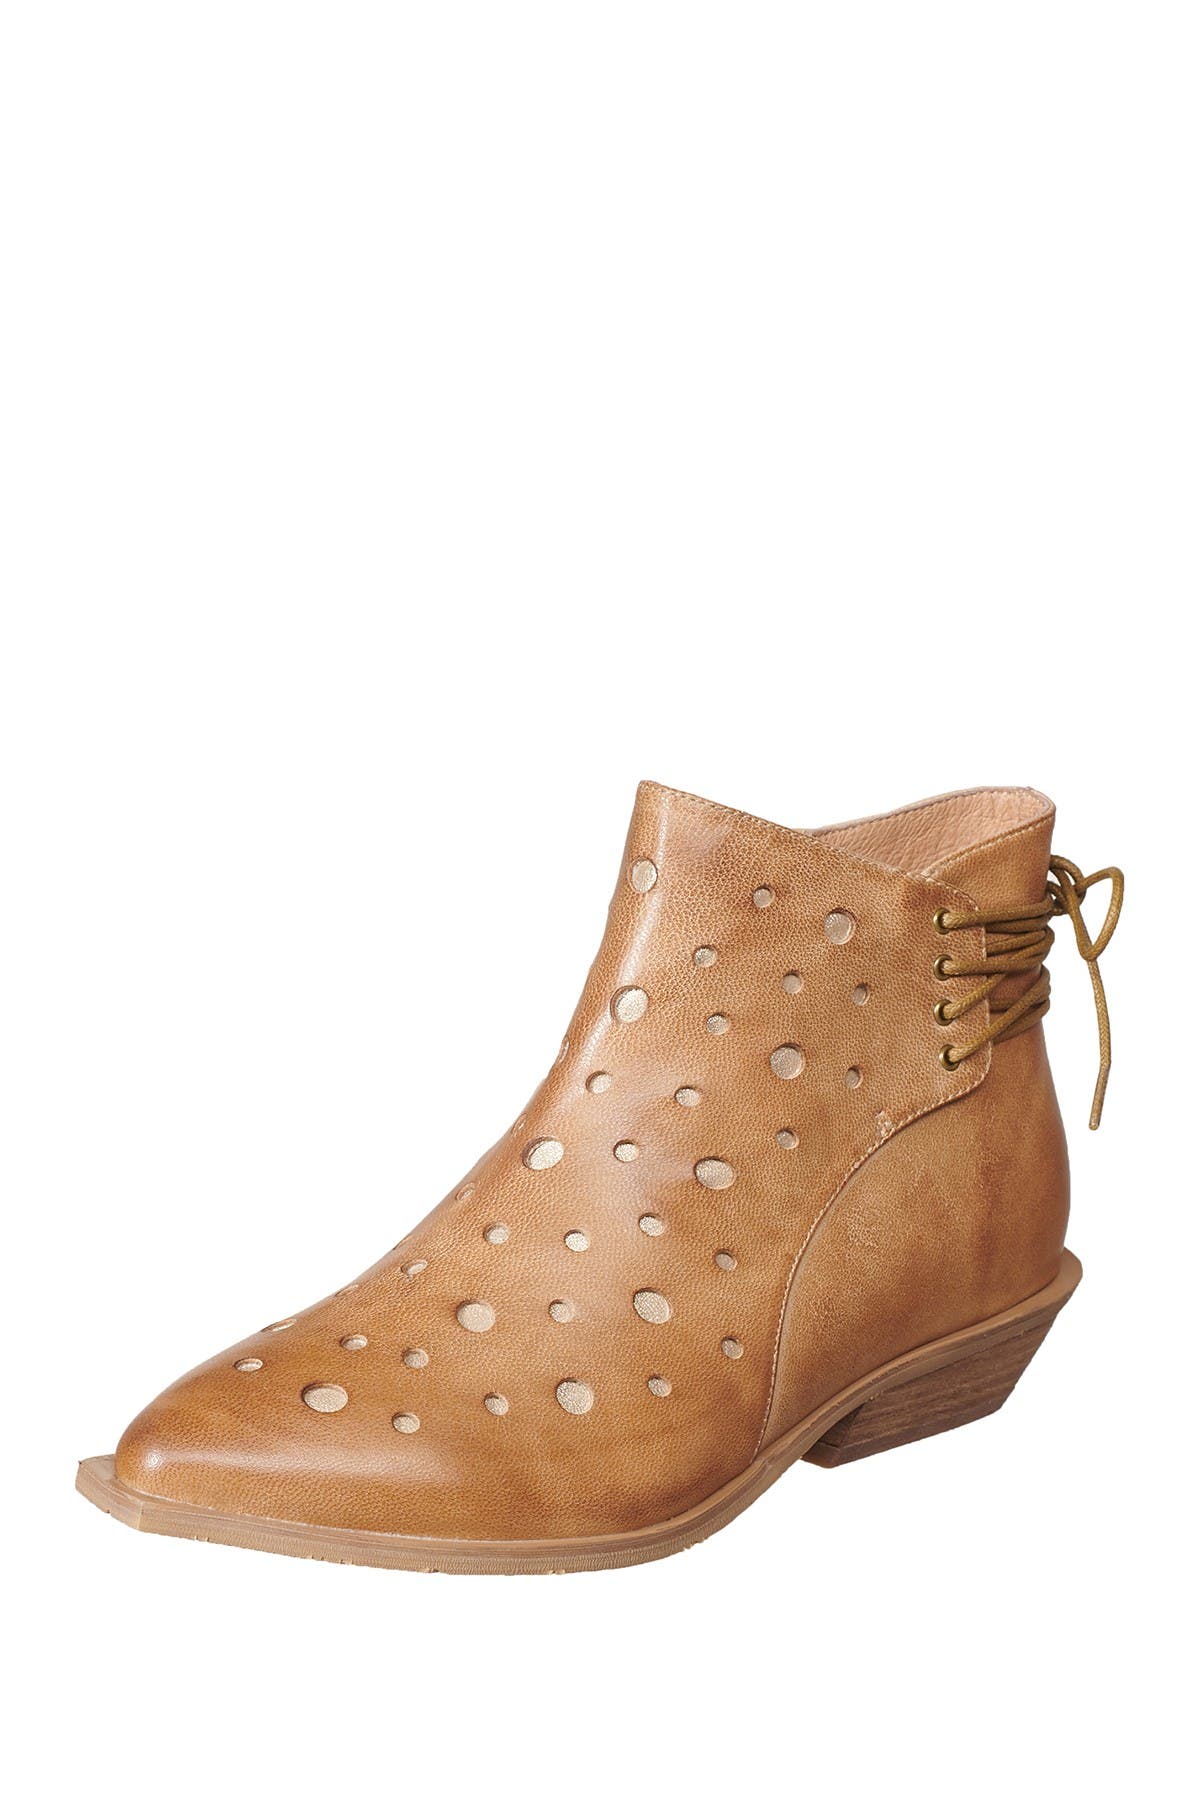 Antelope Laser Cut Leather Lace-up Back Boot In Beige/khaki